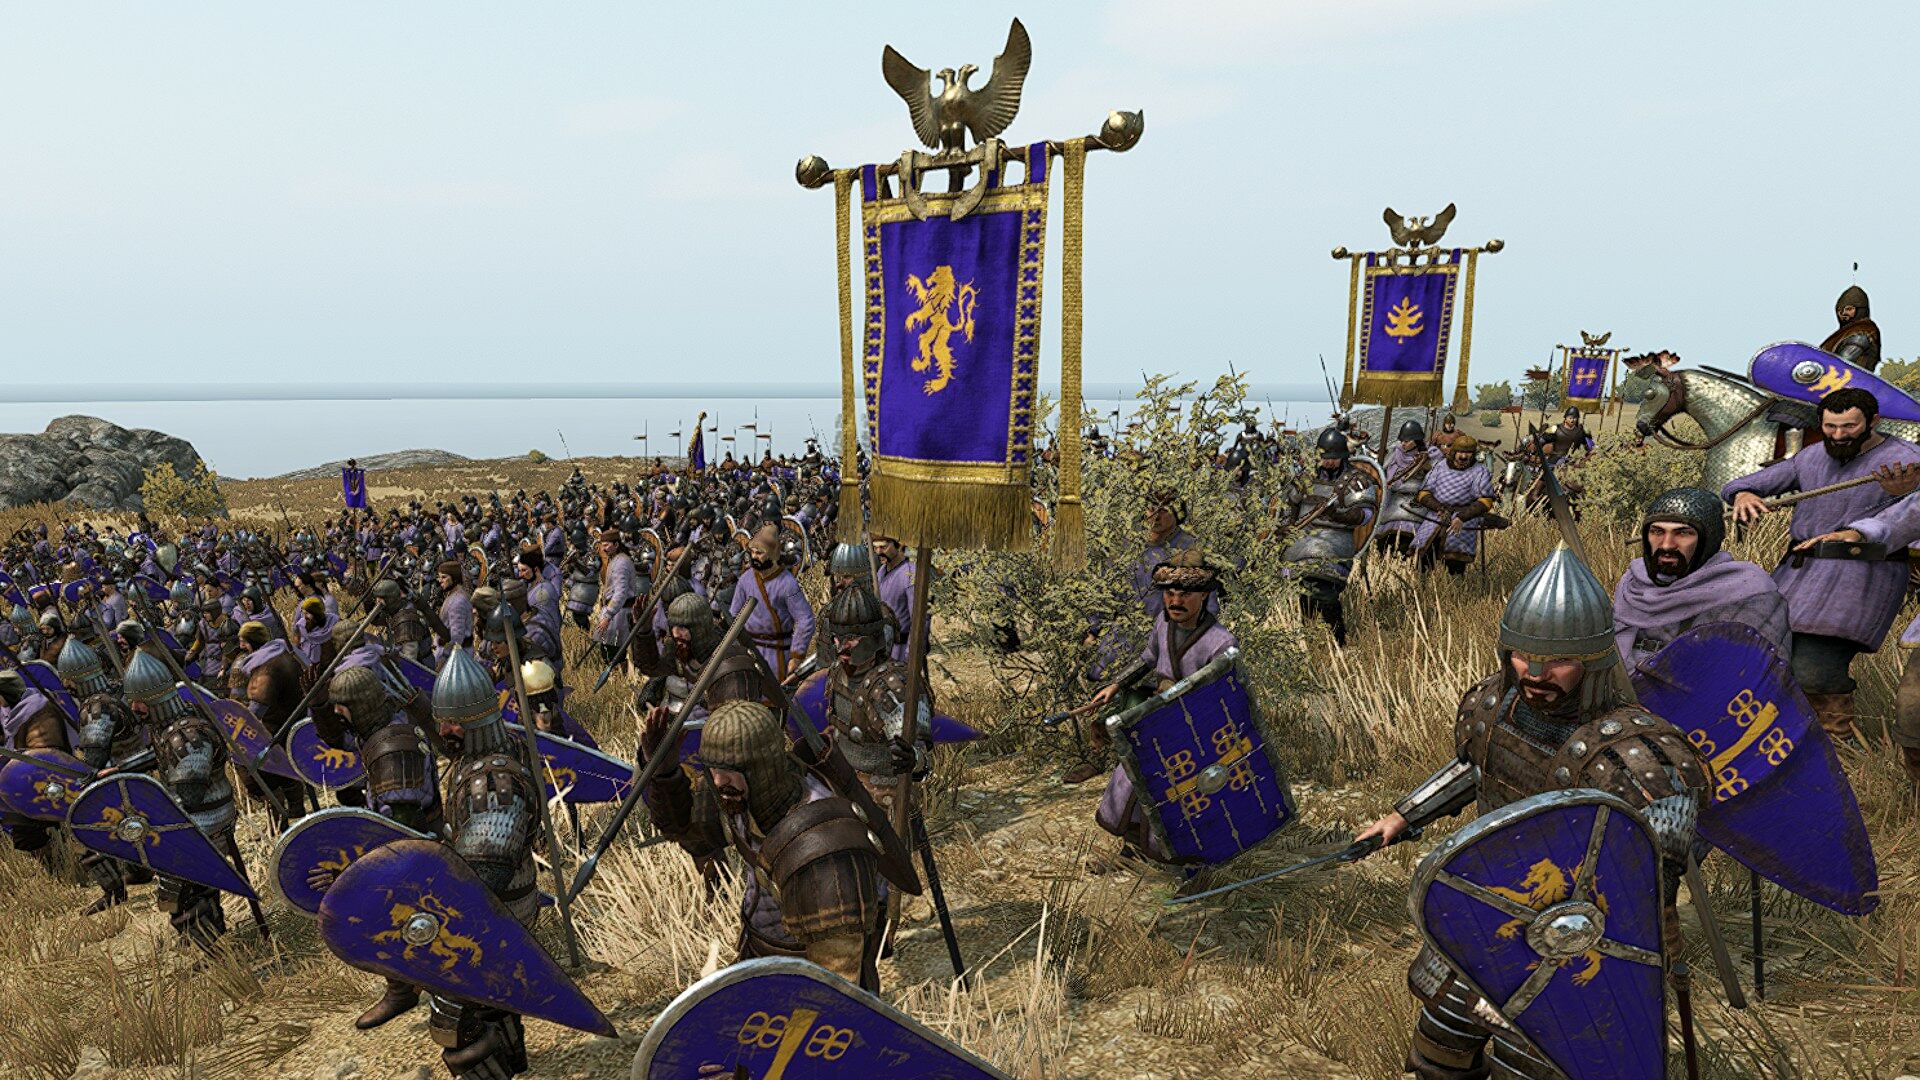 Mount & Blade 2: Bannerlord is finally letting you battle with banners ahead of its 1.0 release this month